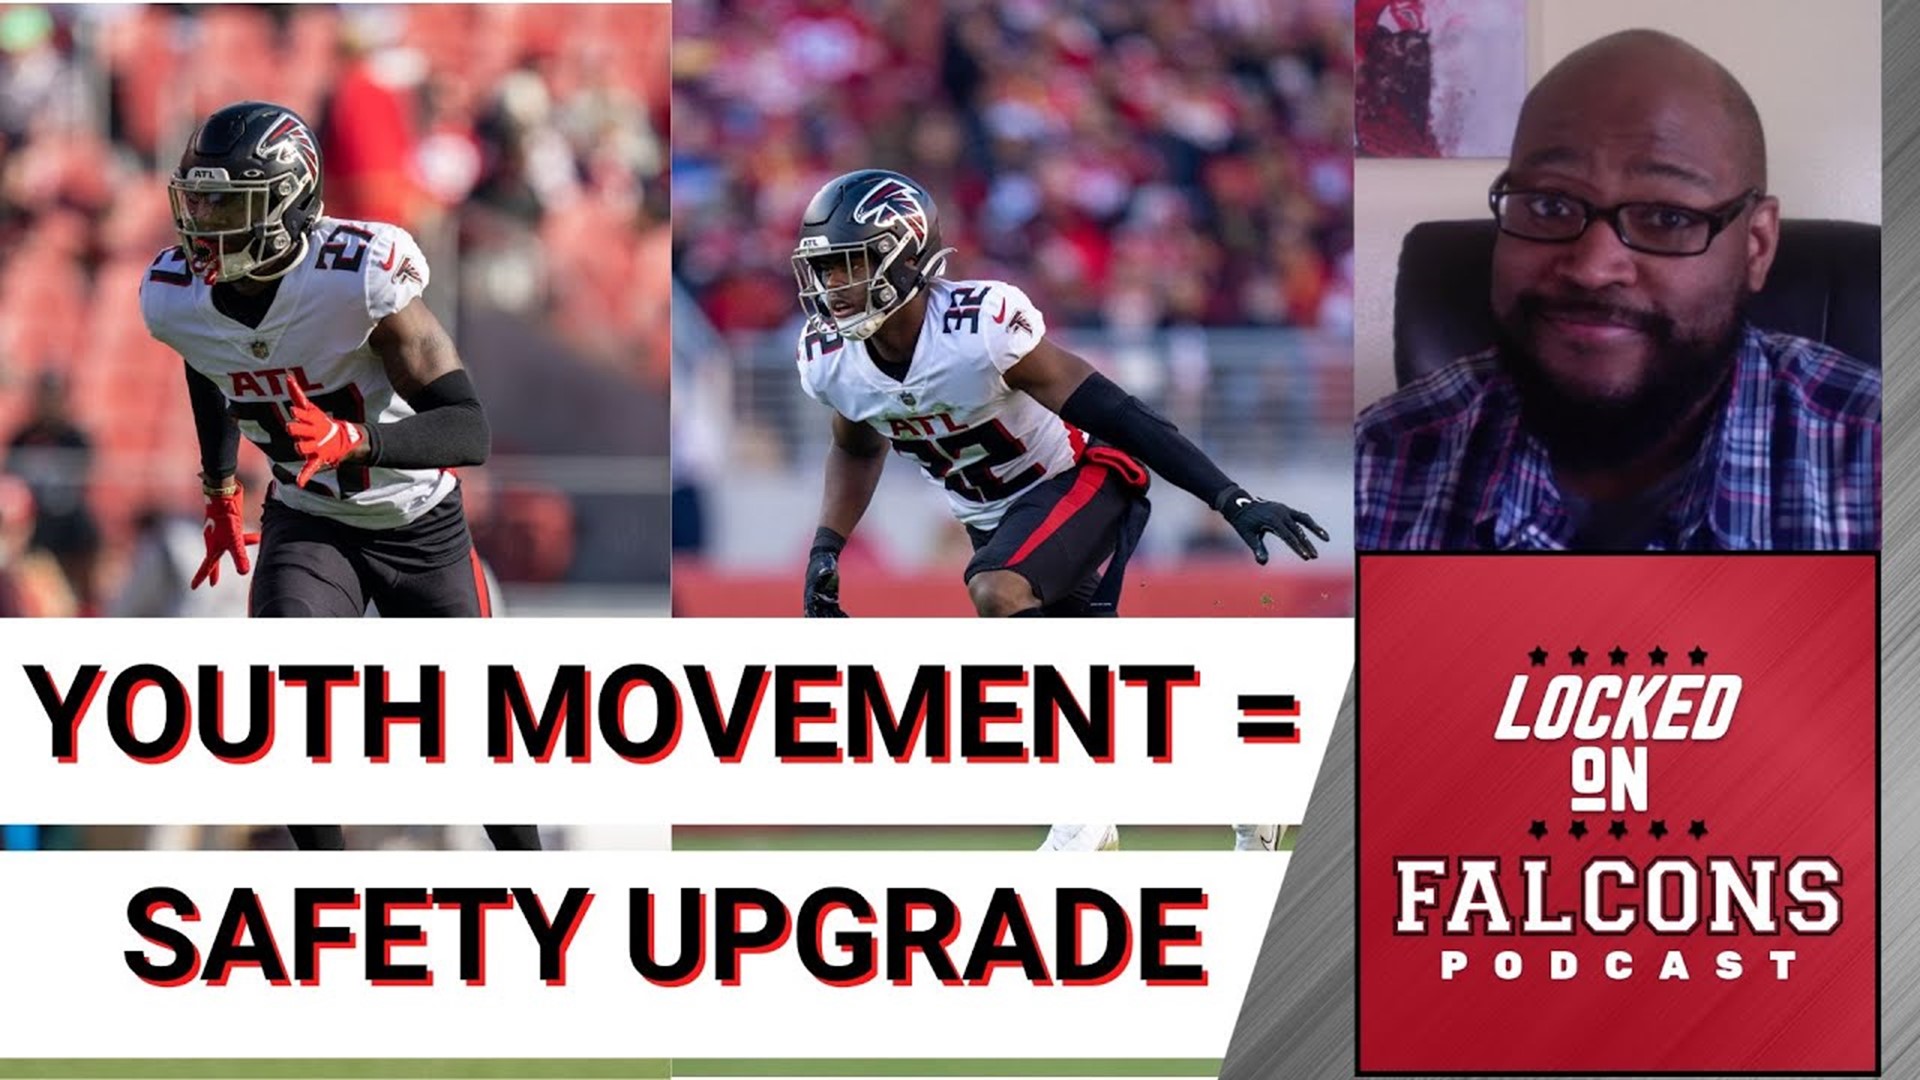 Aaron breaks down the Atlanta Falcons safety position, discussing if expected starters Richie Grant and Jaylinn Hawkins will have breakout seasons.